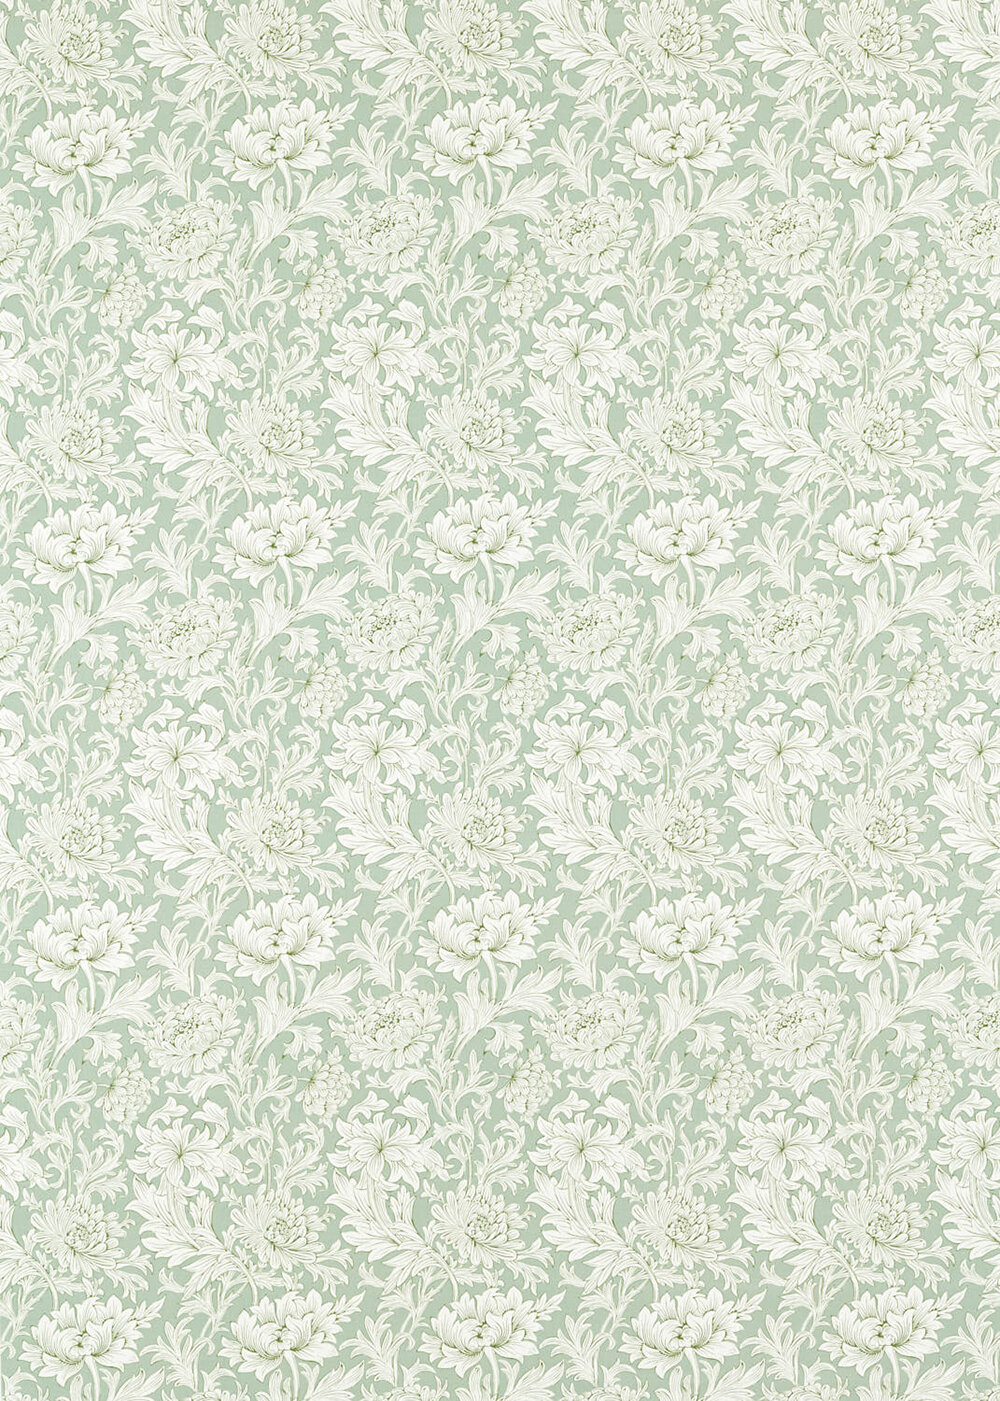 Chrysanthemum Toile Fabric - Willow - by Morris